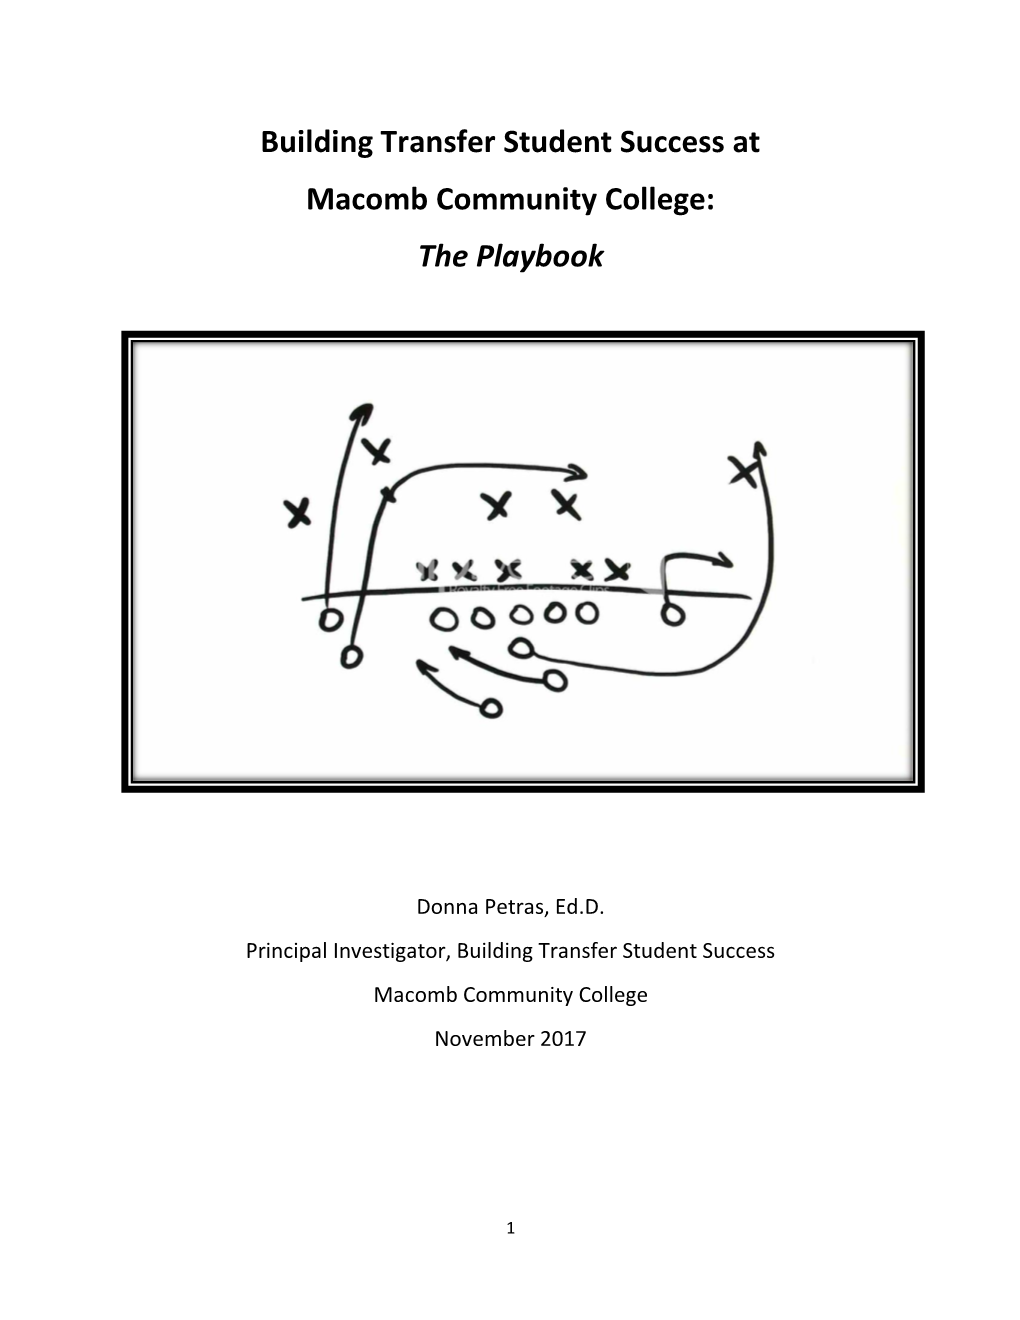 Building Transfer Student Success at Macomb Community College: the Playbook